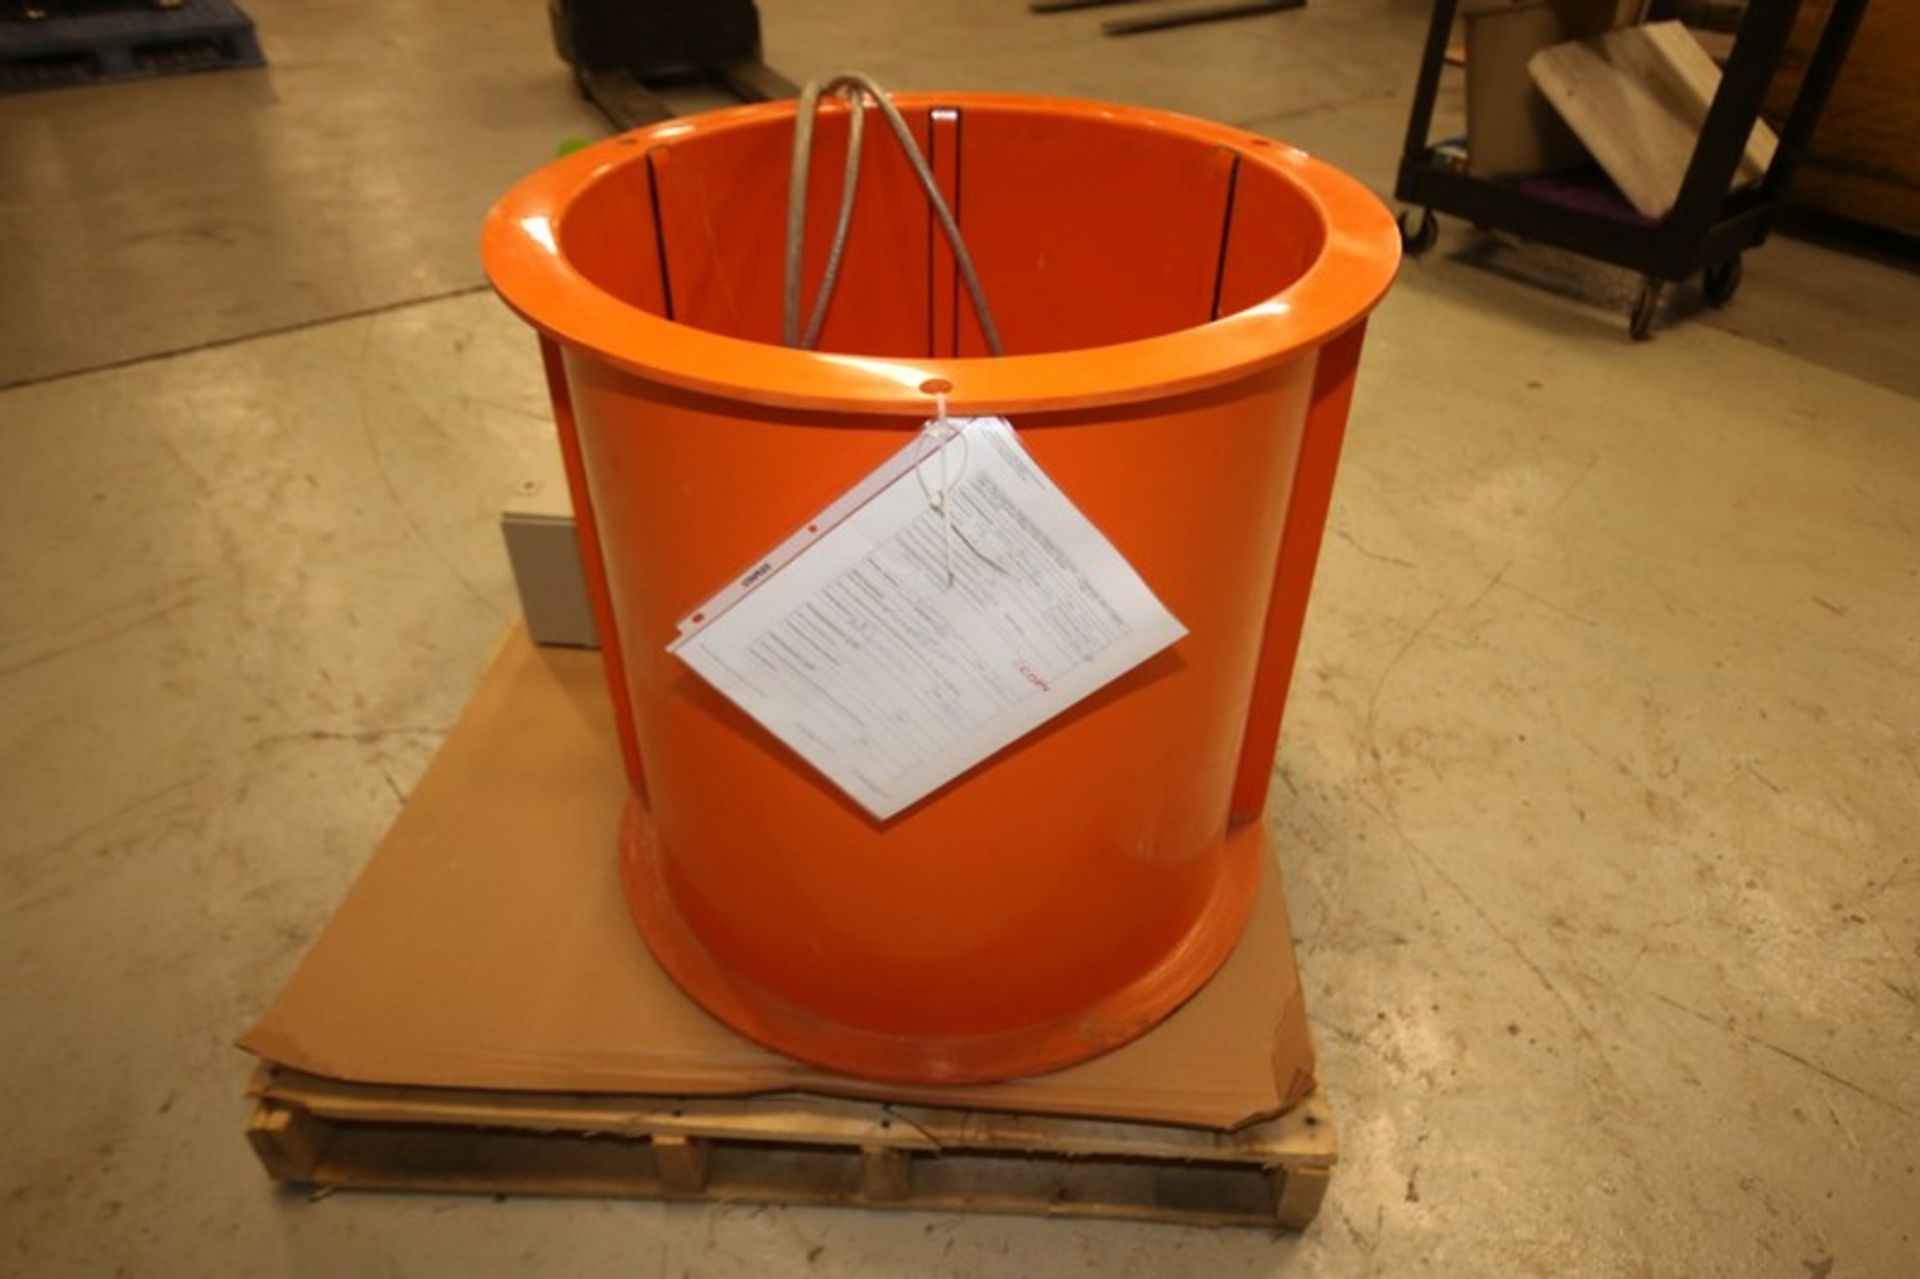 Thermo Safe Induction Drum Heater SN 2894, with Controller, 240V (INV#92773) (Located @ the MDG - Image 3 of 4